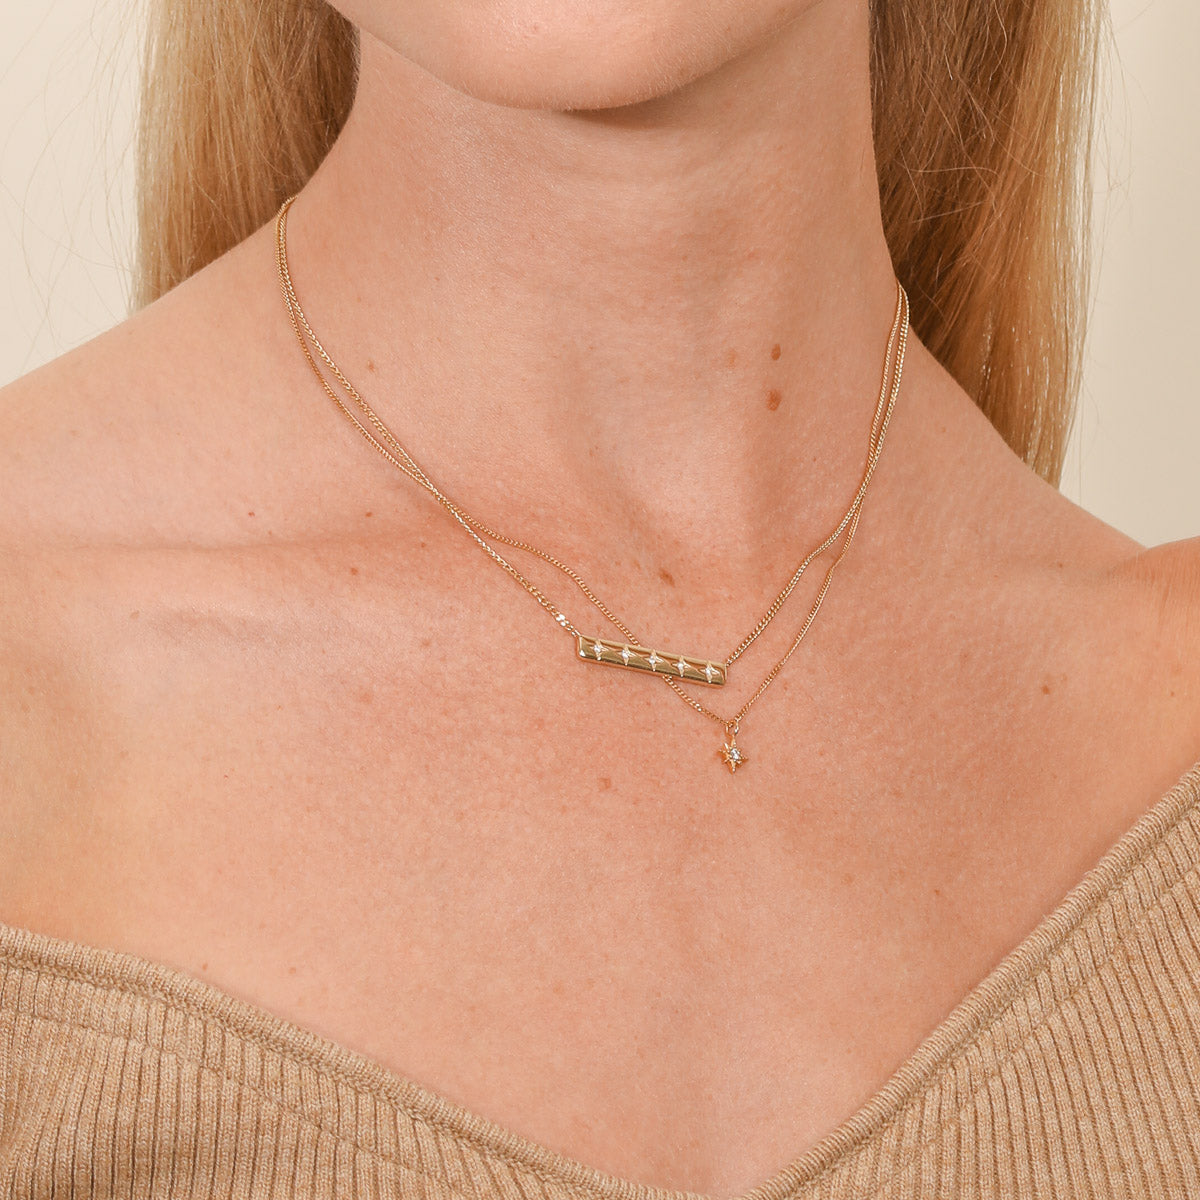 Cosmic Star Bar Necklace in Gold worn layered with twilight star pendant necklace